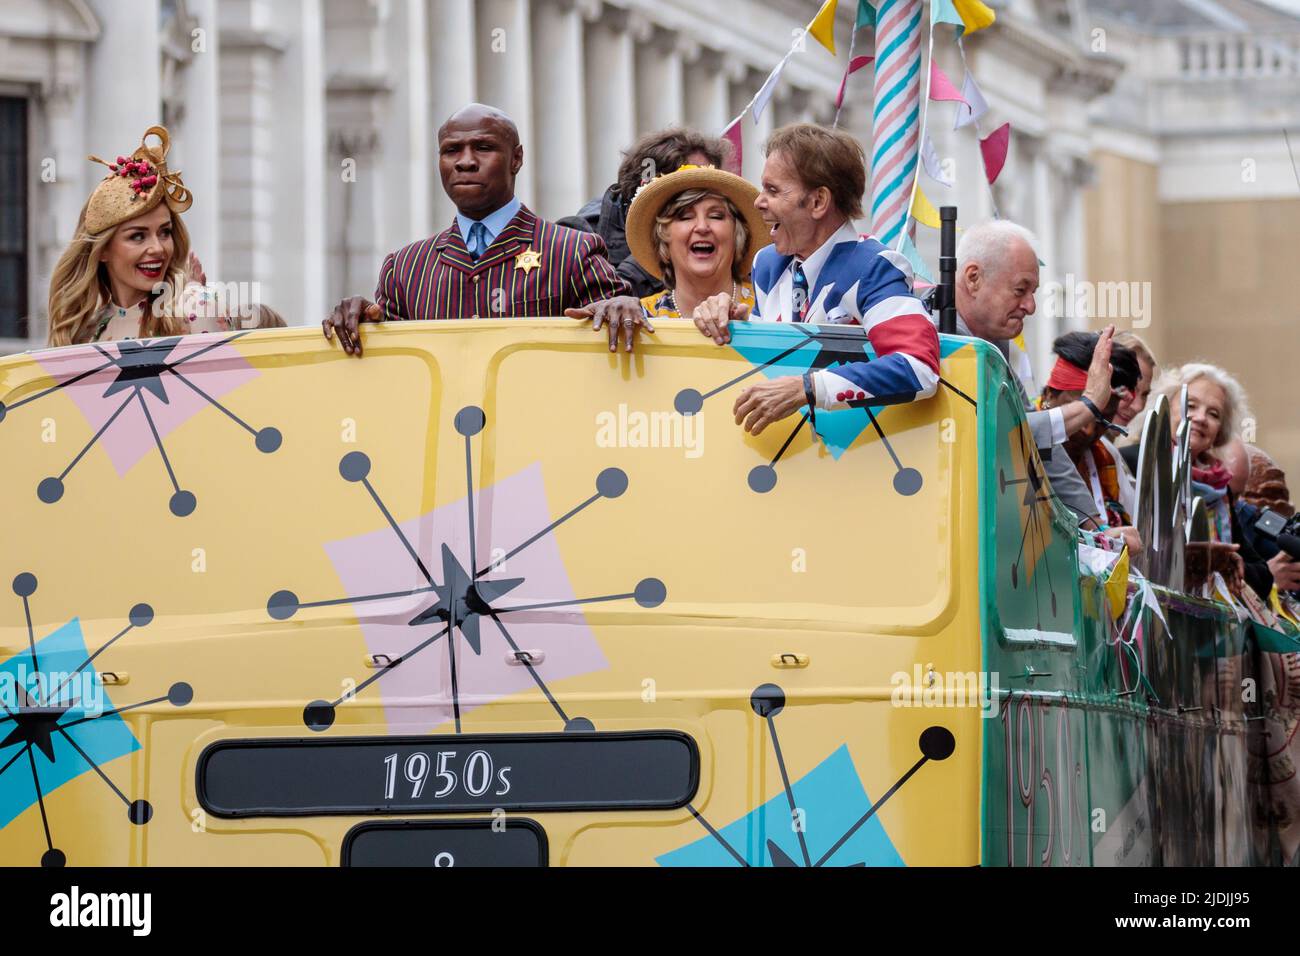 'National Treasures' on board the 1950s bus, one of 7 for each decade of Her Majesty's reign, at the The Platinum Jubilee Pageant as it proceeds along Stock Photo